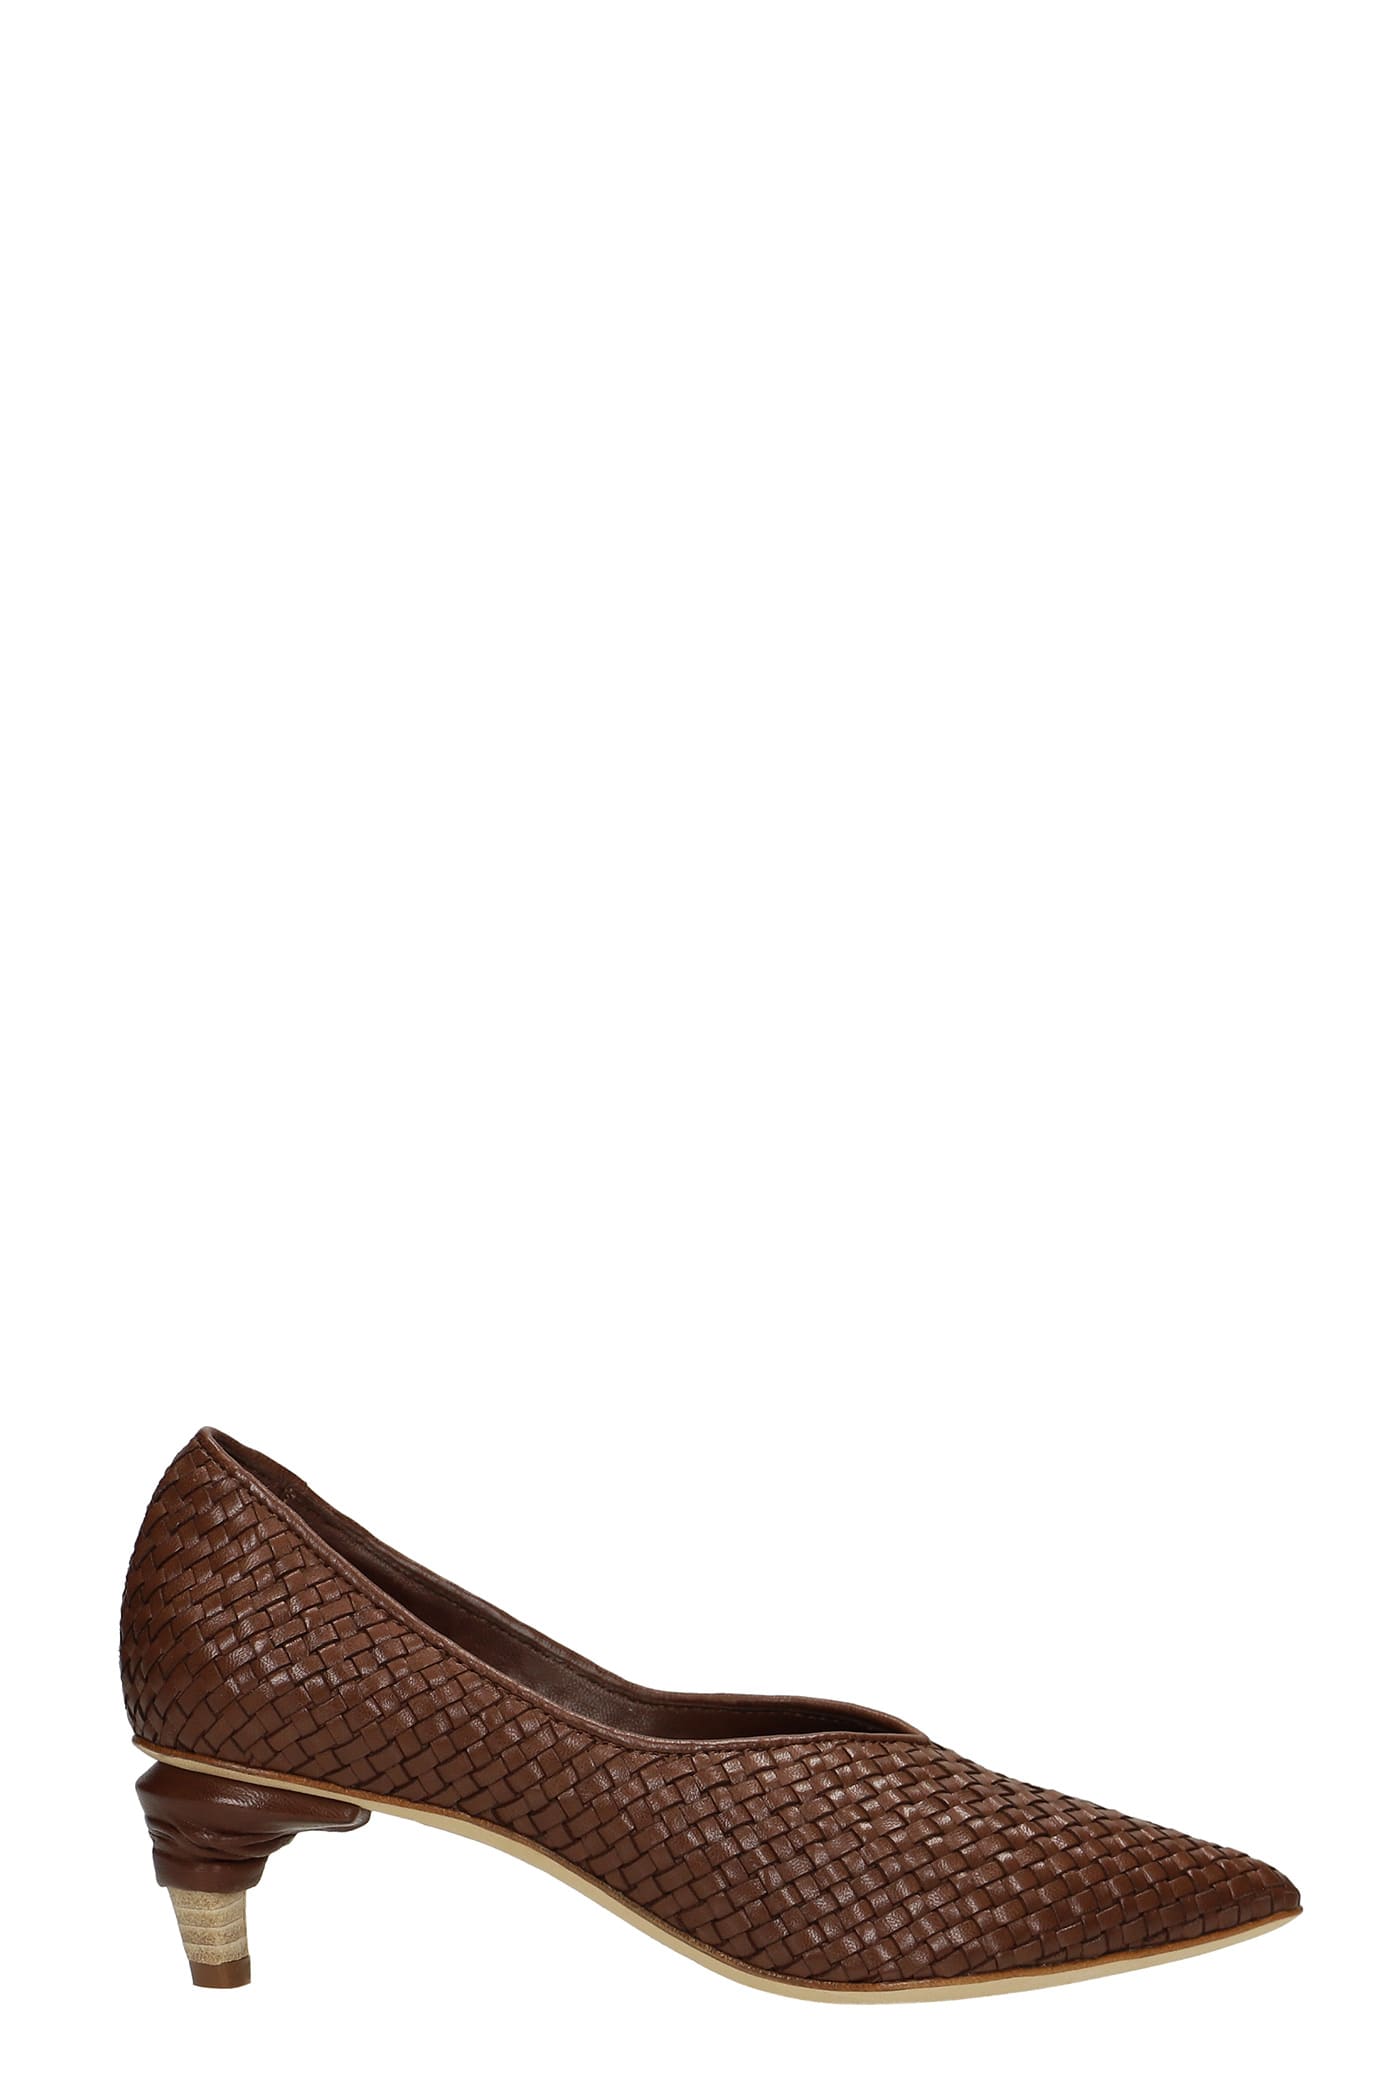 Officine Creative Pumps In Brown Leather